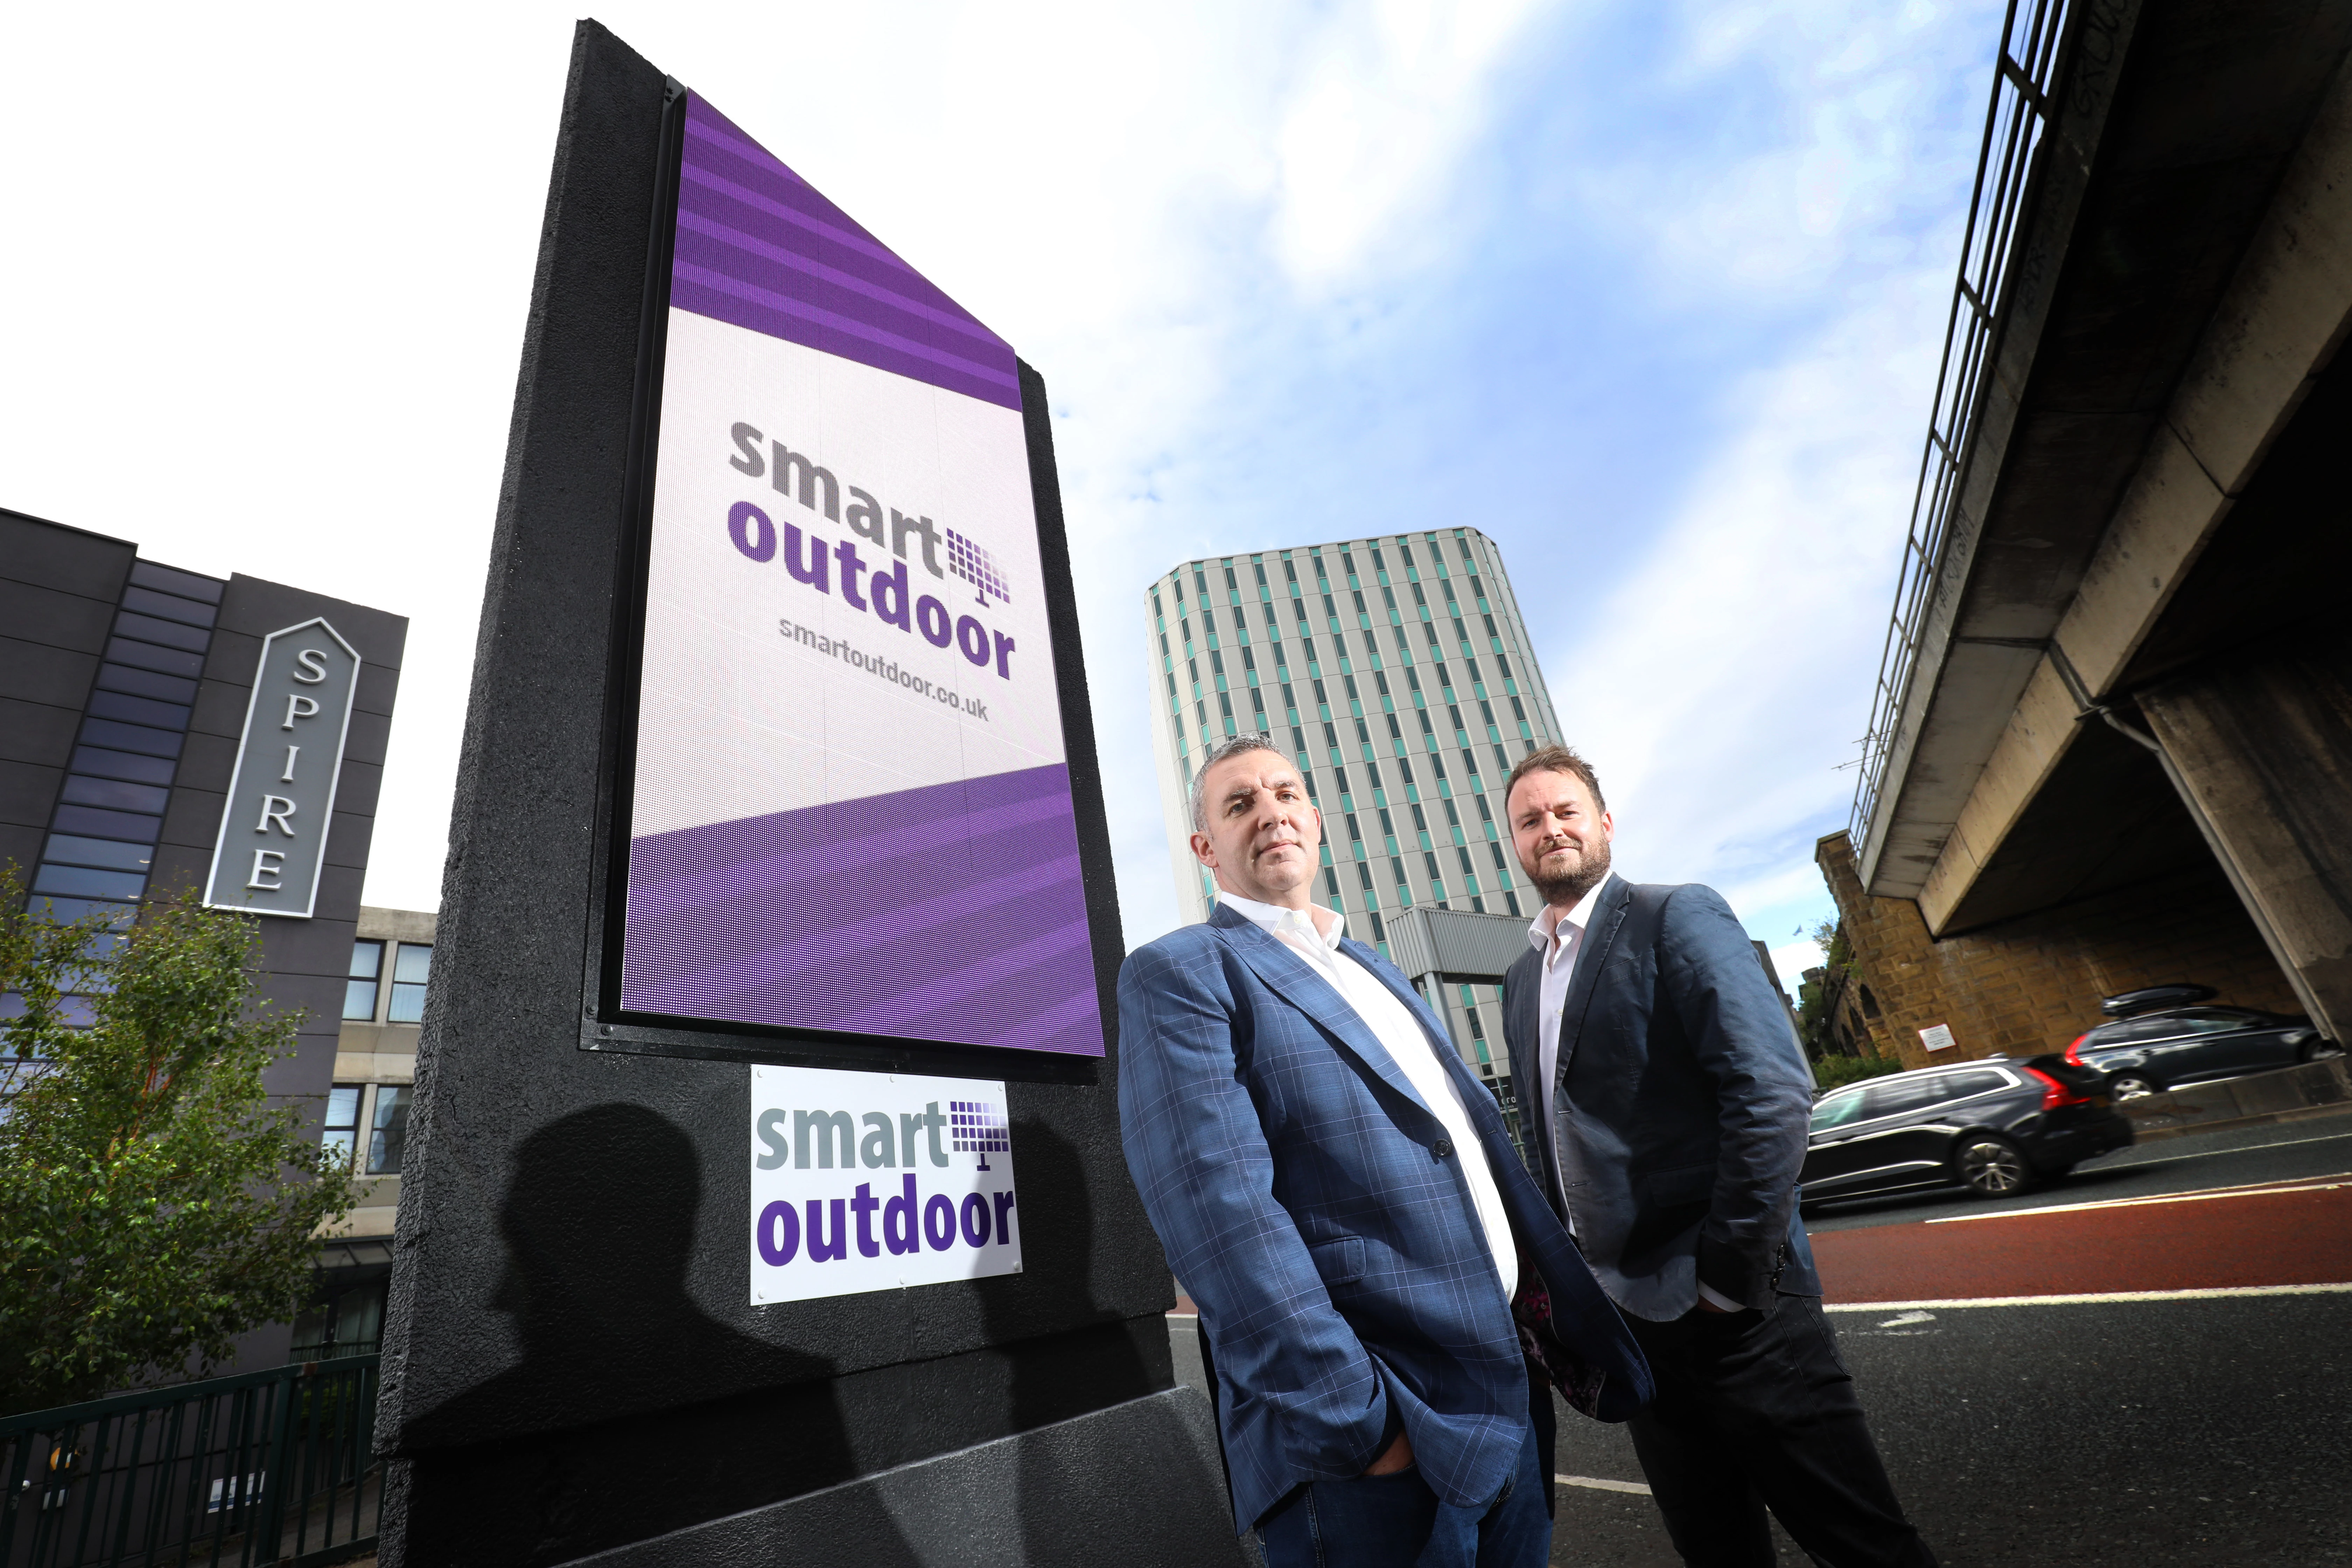 Managing Director Mark Catterall and Commercial Director Mark Clancey of the Smart Outdoor Group